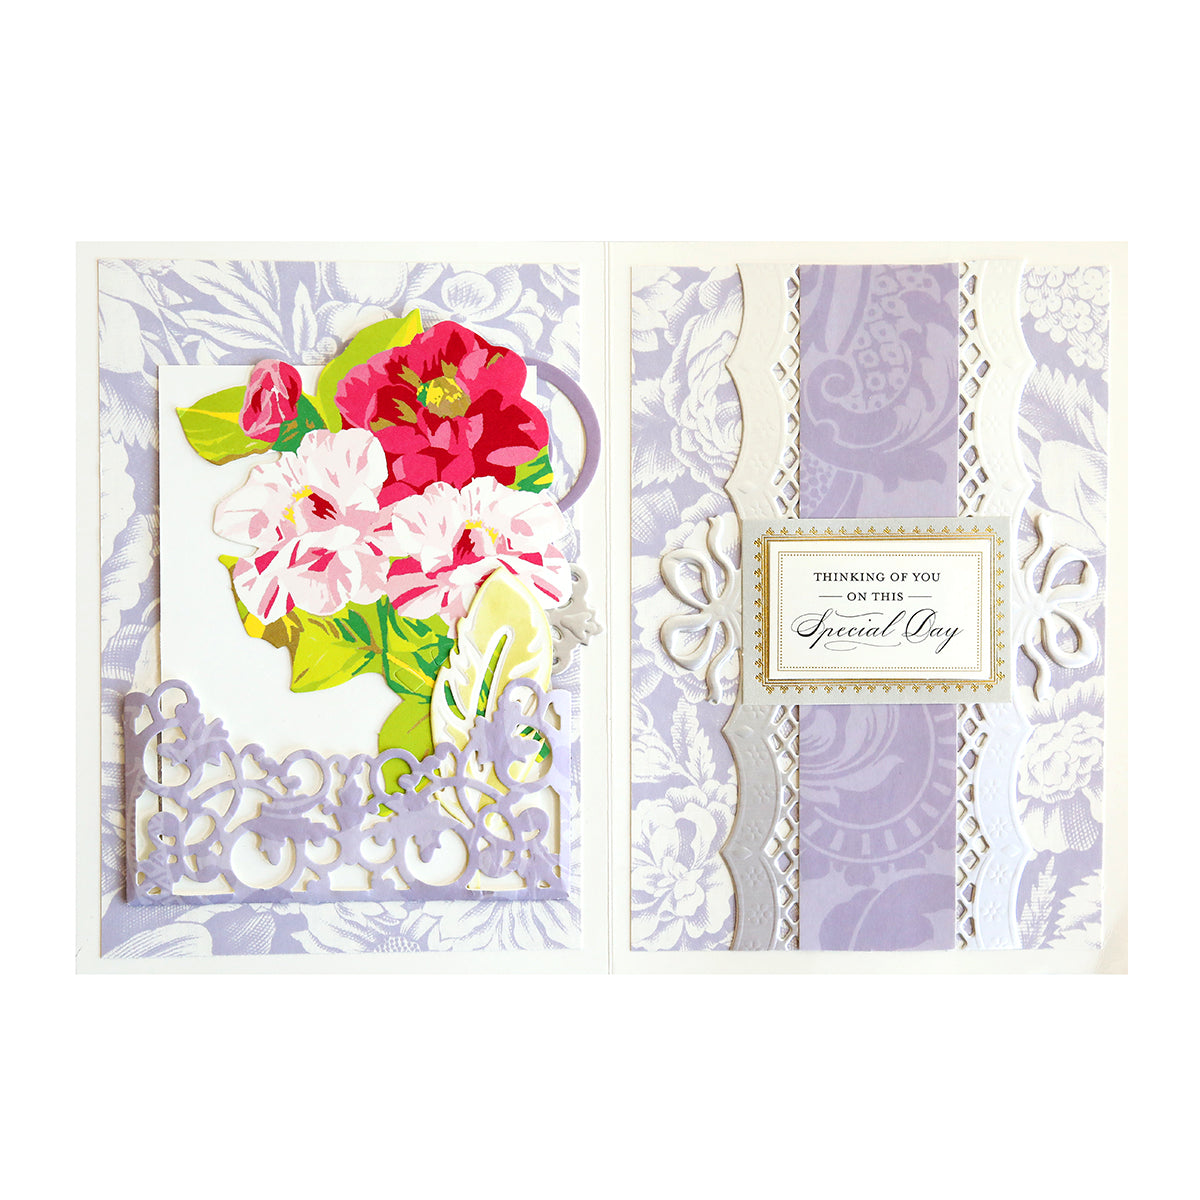 An elegant purple and white card adorned with flowers from the Anniversary Pocket Dies.